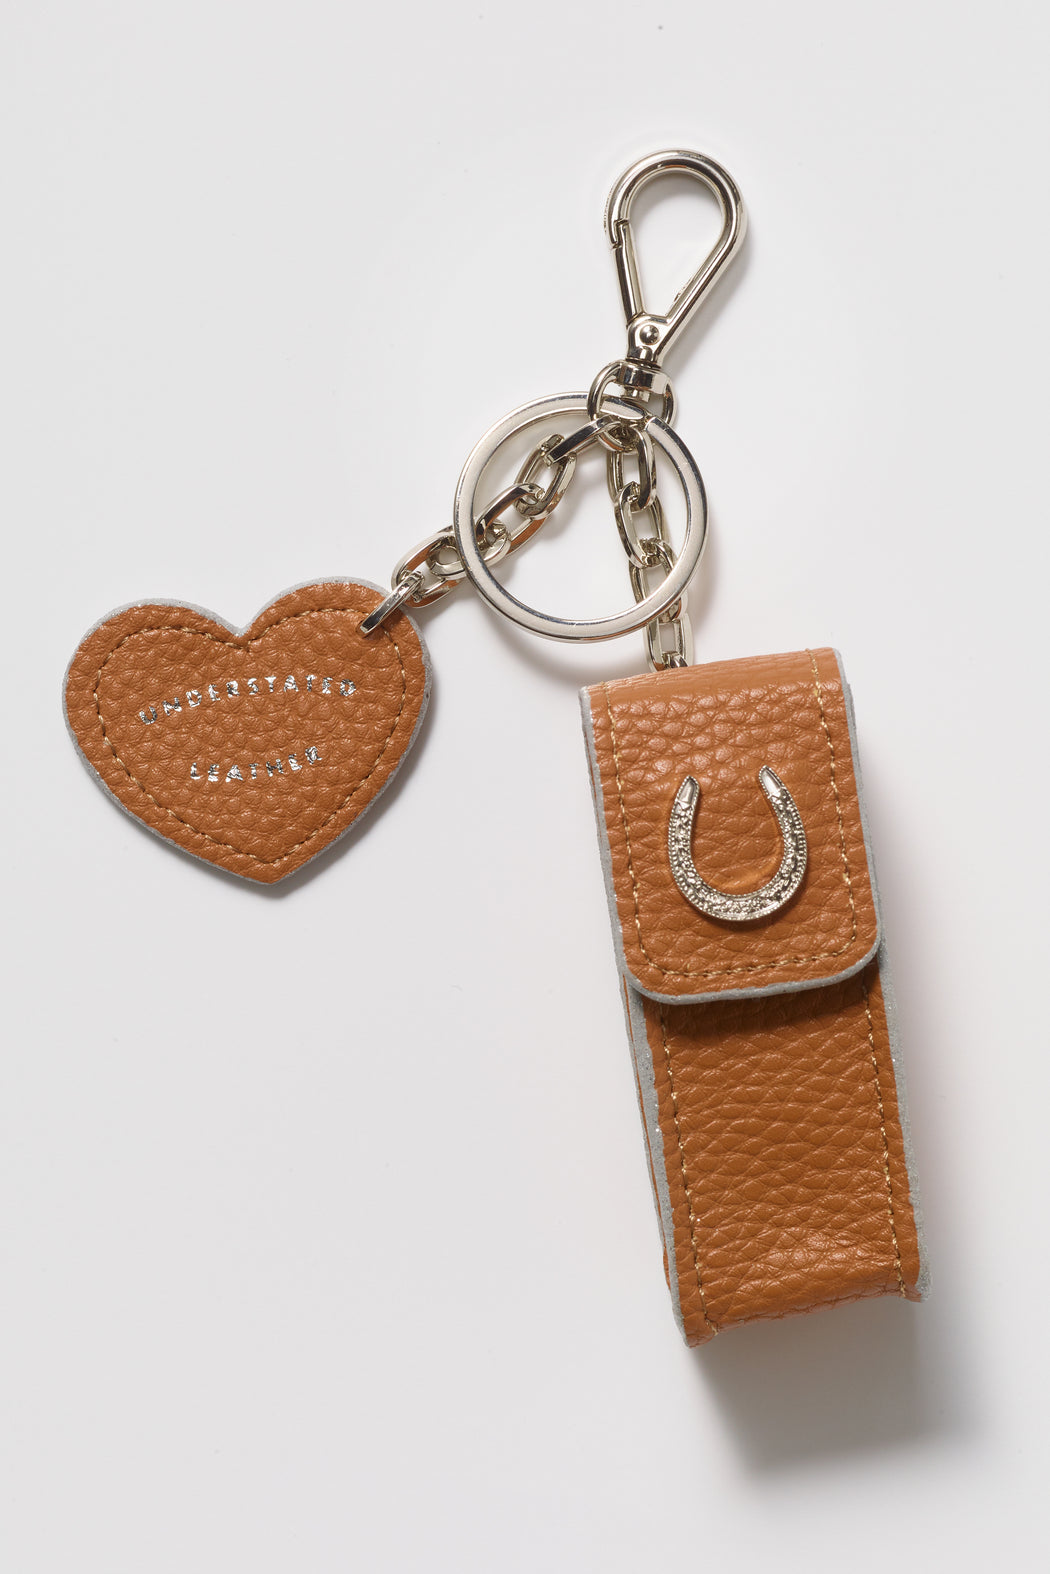 WHISKEY LADY LUCK LIPSTICK CASE KEYCHAIN — Understated Leather